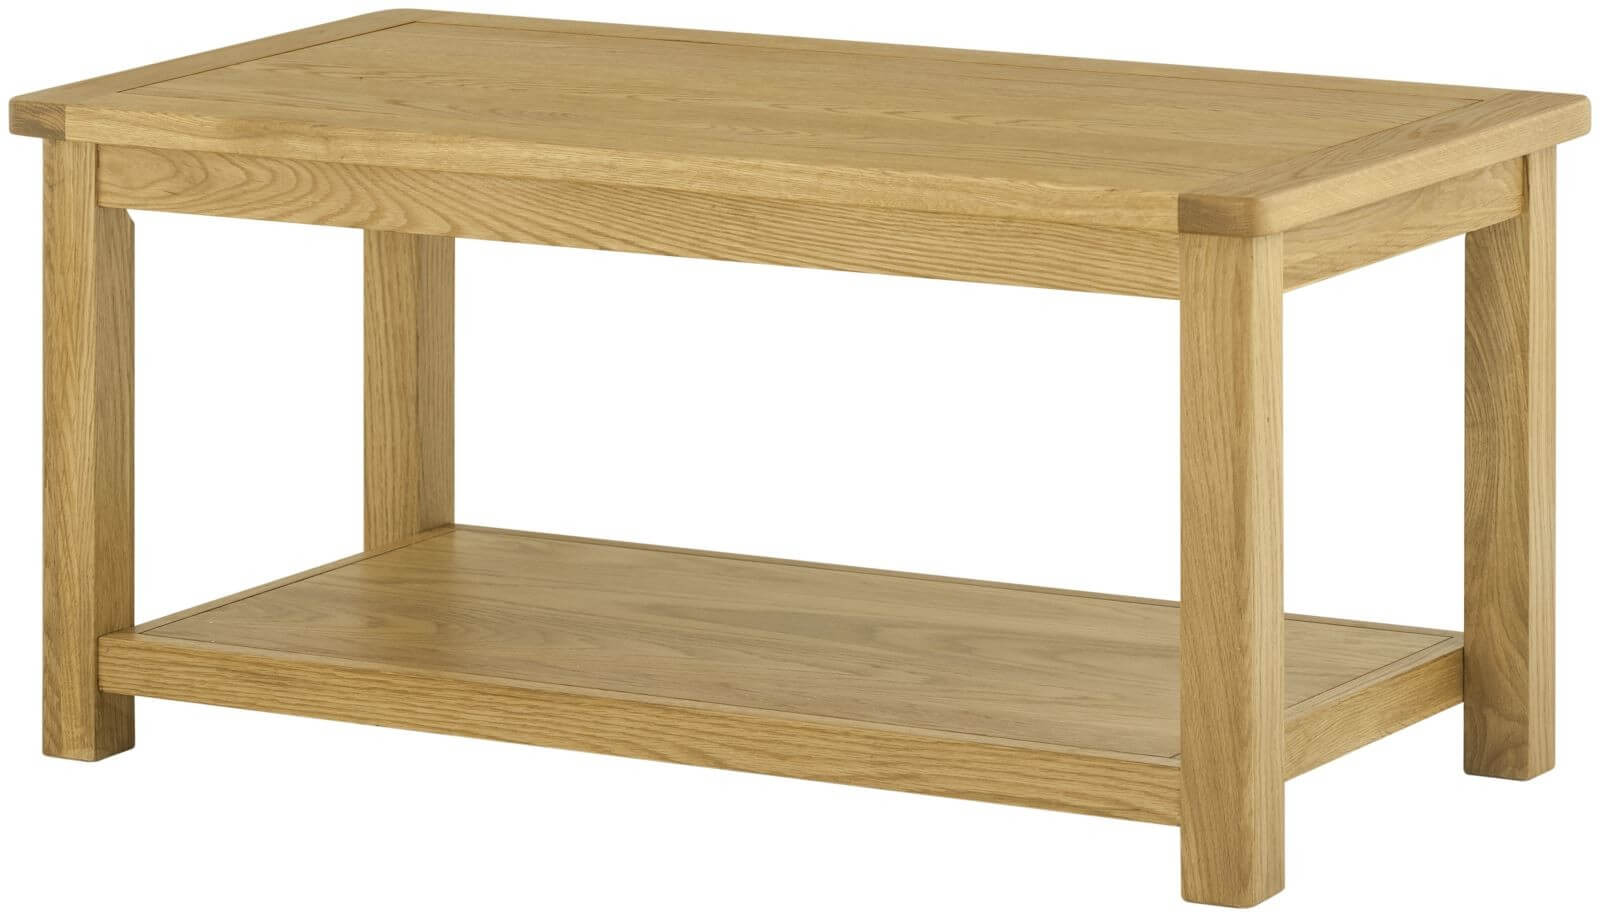 Showing image for Seattle coffee table - oak